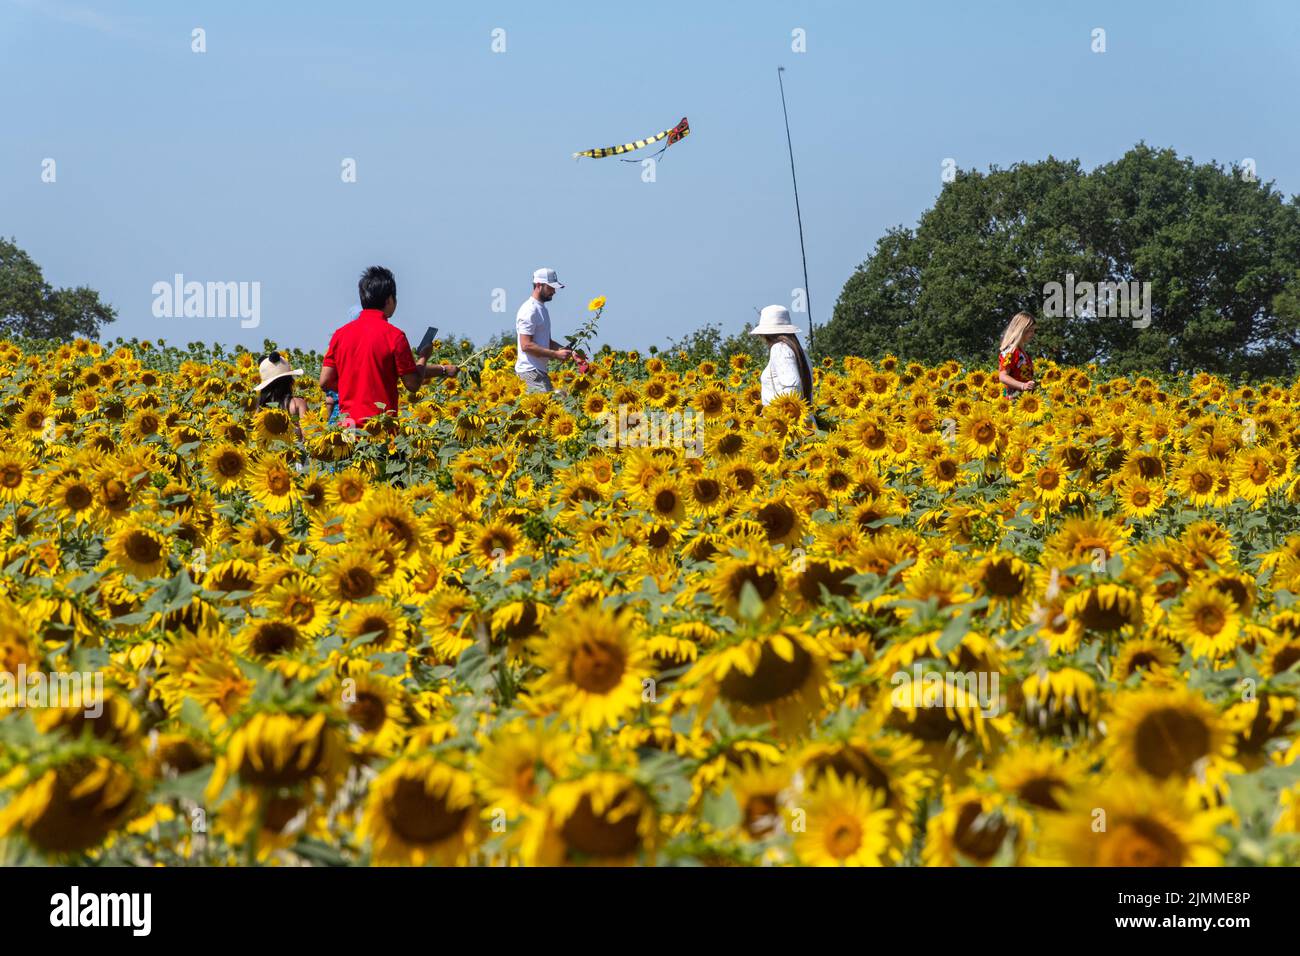 Field of sunflowers during August or summer with people picking flowers, Hampshire, England, UK Stock Photo